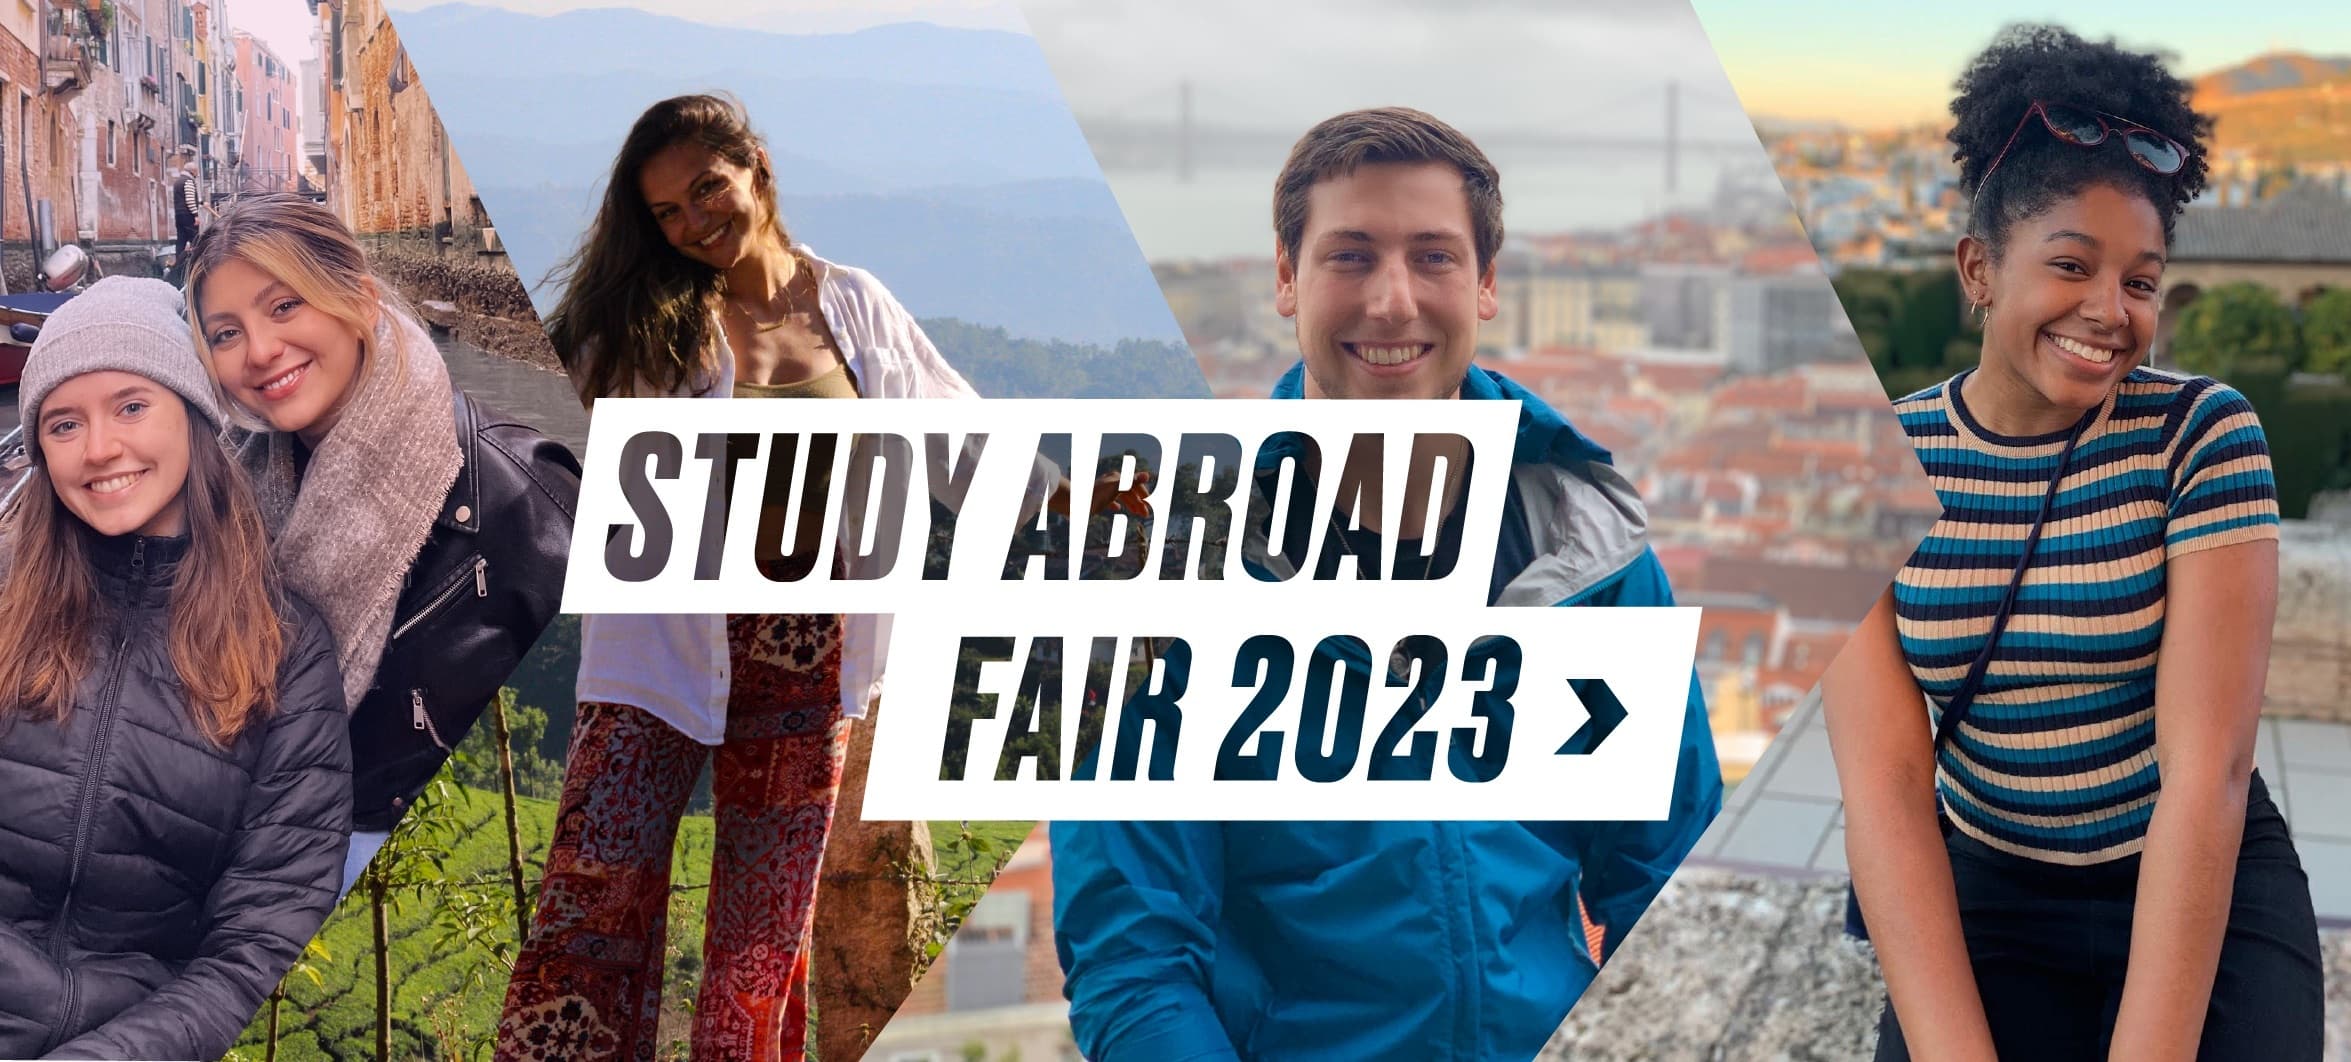 Four picture collage of students studying abroad in different parts of the world, including Venice, Bali, Copenhagen and France. The words "Study Abroad Fair 2023" is superimposed over the images.